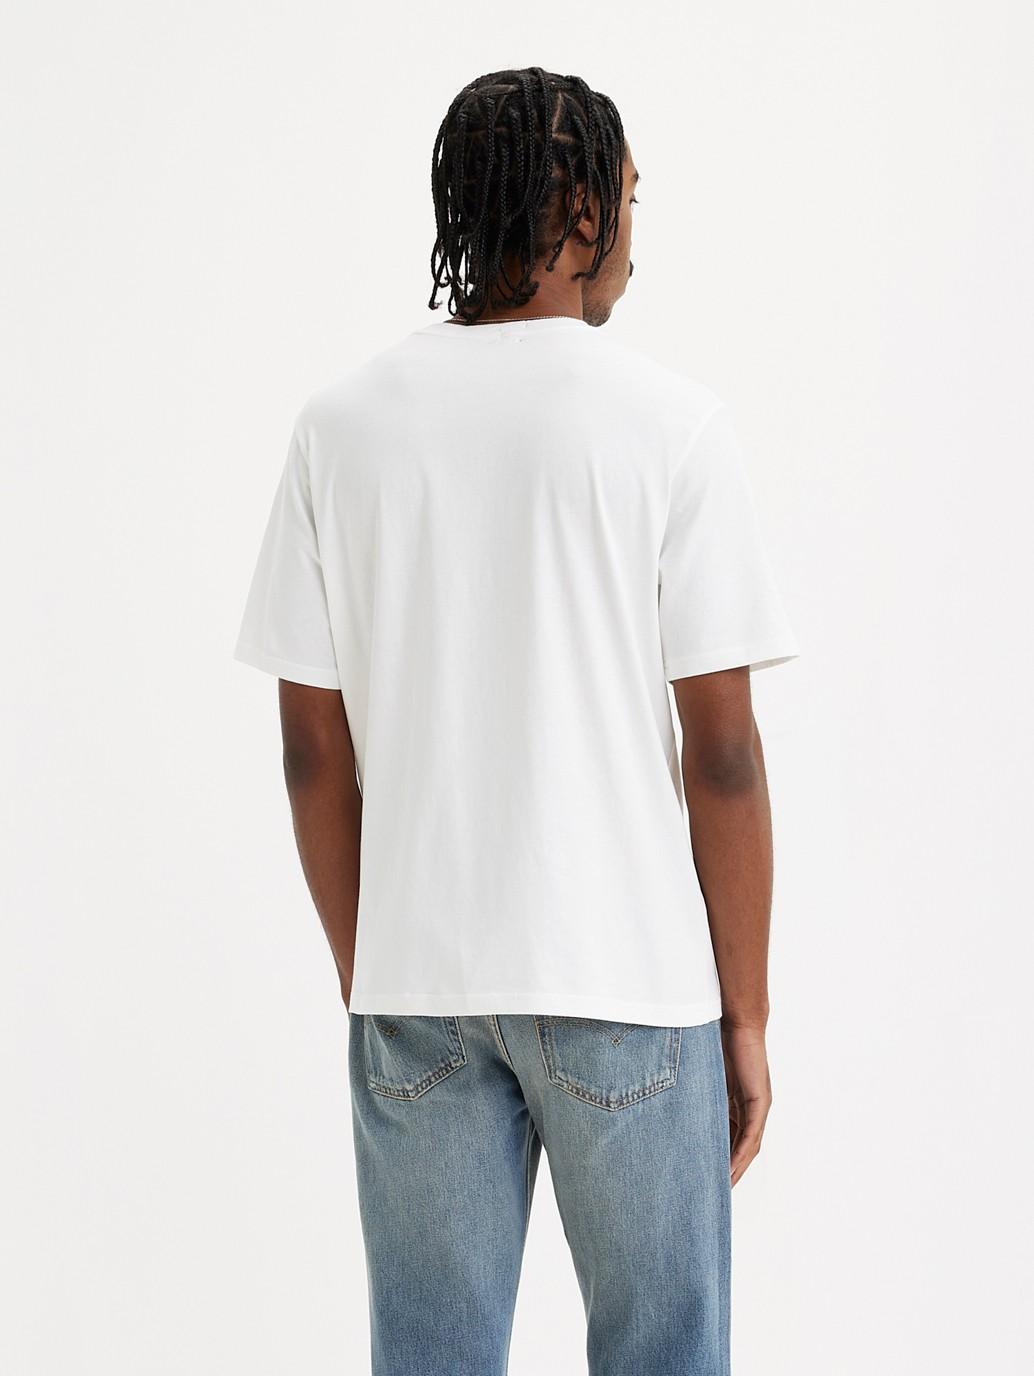 Buy Levi's® Men's Relaxed Fit Short Sleeve Graphic T-Shirt| Levi’s ...